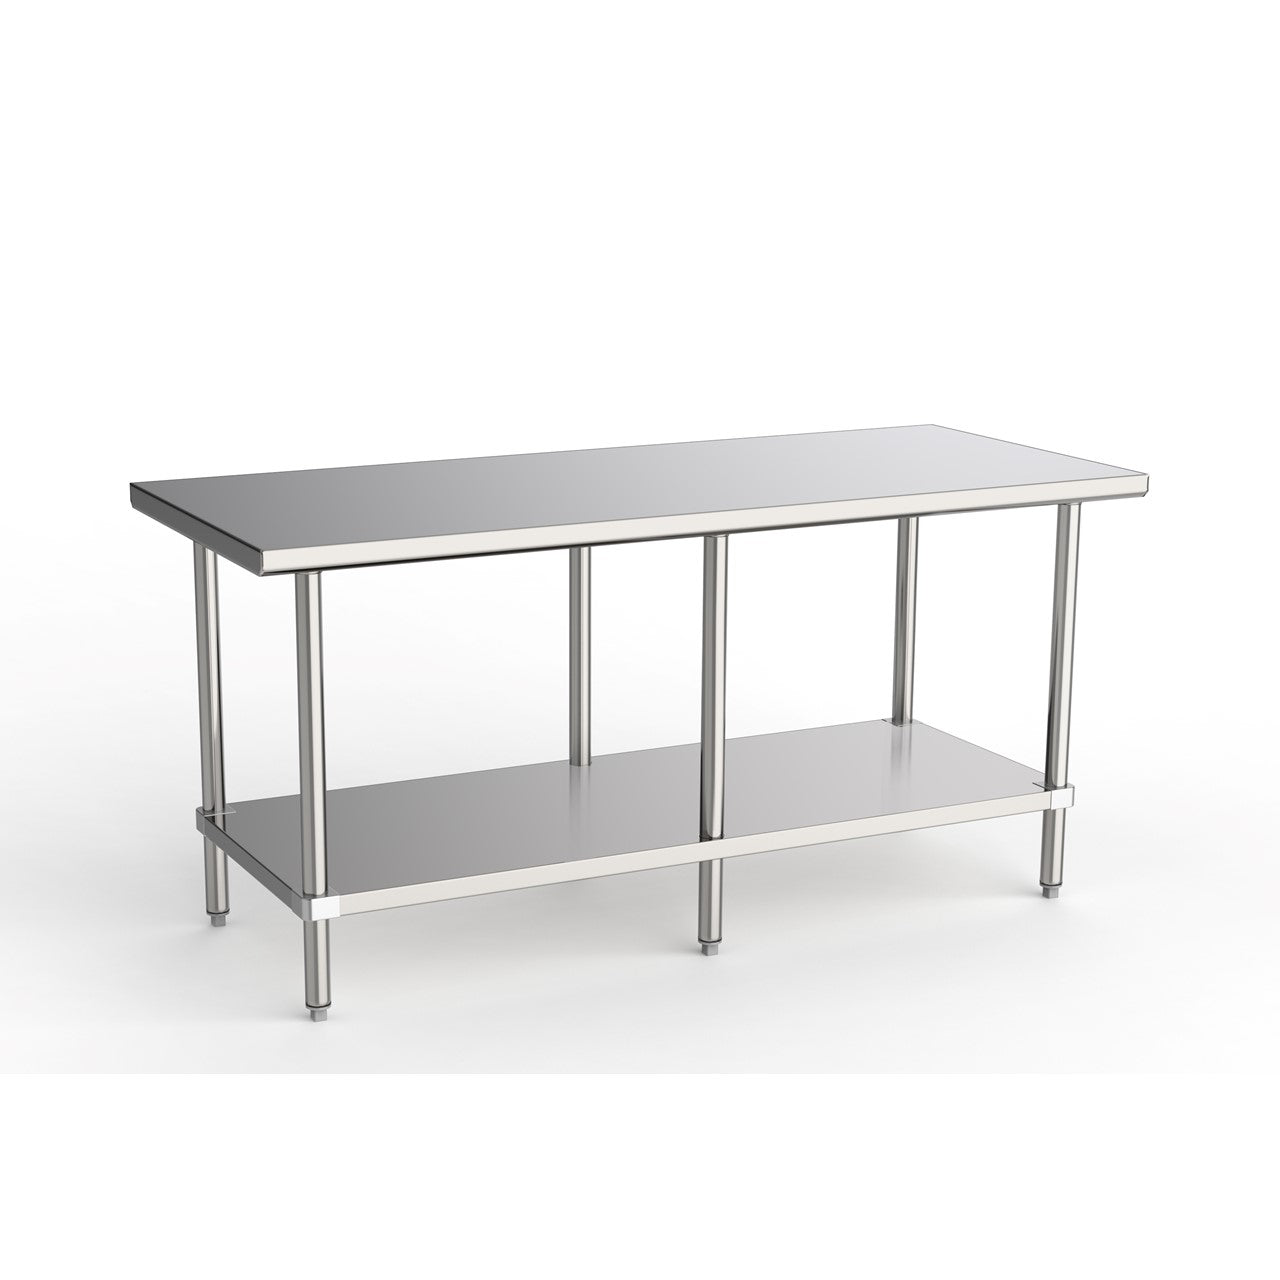 GSW Commercial Grade Flat Top Work Table with Stainless Steel Top, Galvanized Undershelf & Legs, Adjustable Bullet Feet, Perfect for Restaurant, Home, Office, Kitchen or Garage, NSF Approved (24"W x 96"L x 35"H)